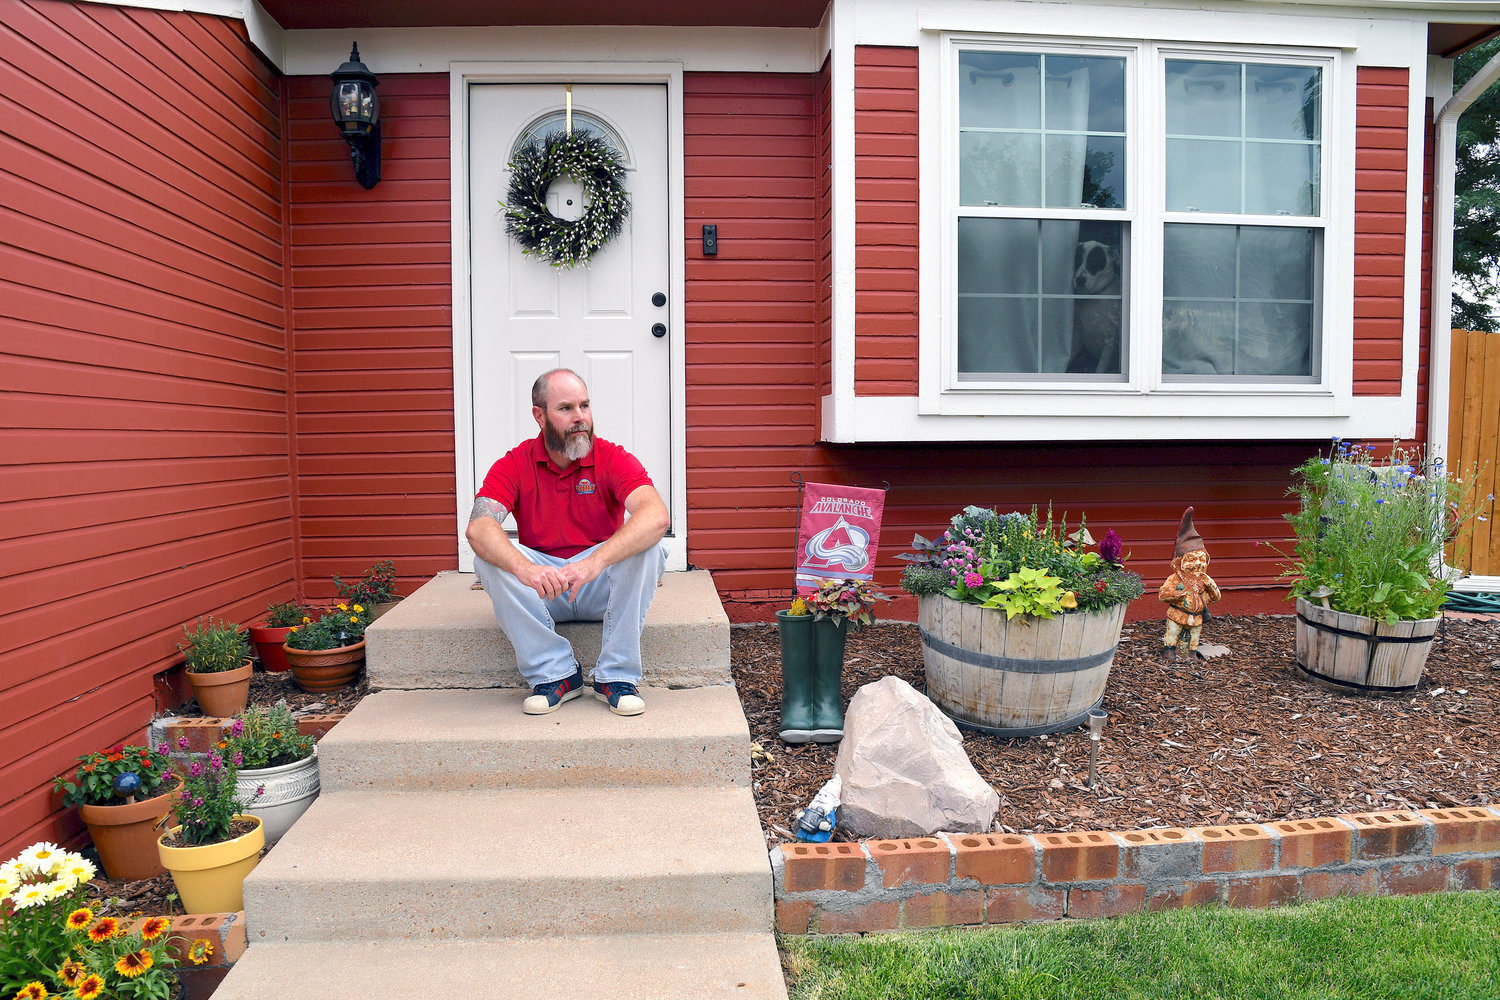 Kyle Tomcak sits in front of his house in Aurora, Colo., on July 18. Tomcak was in the market for a home priced around $450,000 for his in-laws and he and his wife bid on every house they toured. He said his search became increasingly dispiriting as he not only lost out to investors fronting cash offers $100,000 over asking price but as mortgage rates started to balloon. He has since pulled out of the housing search.